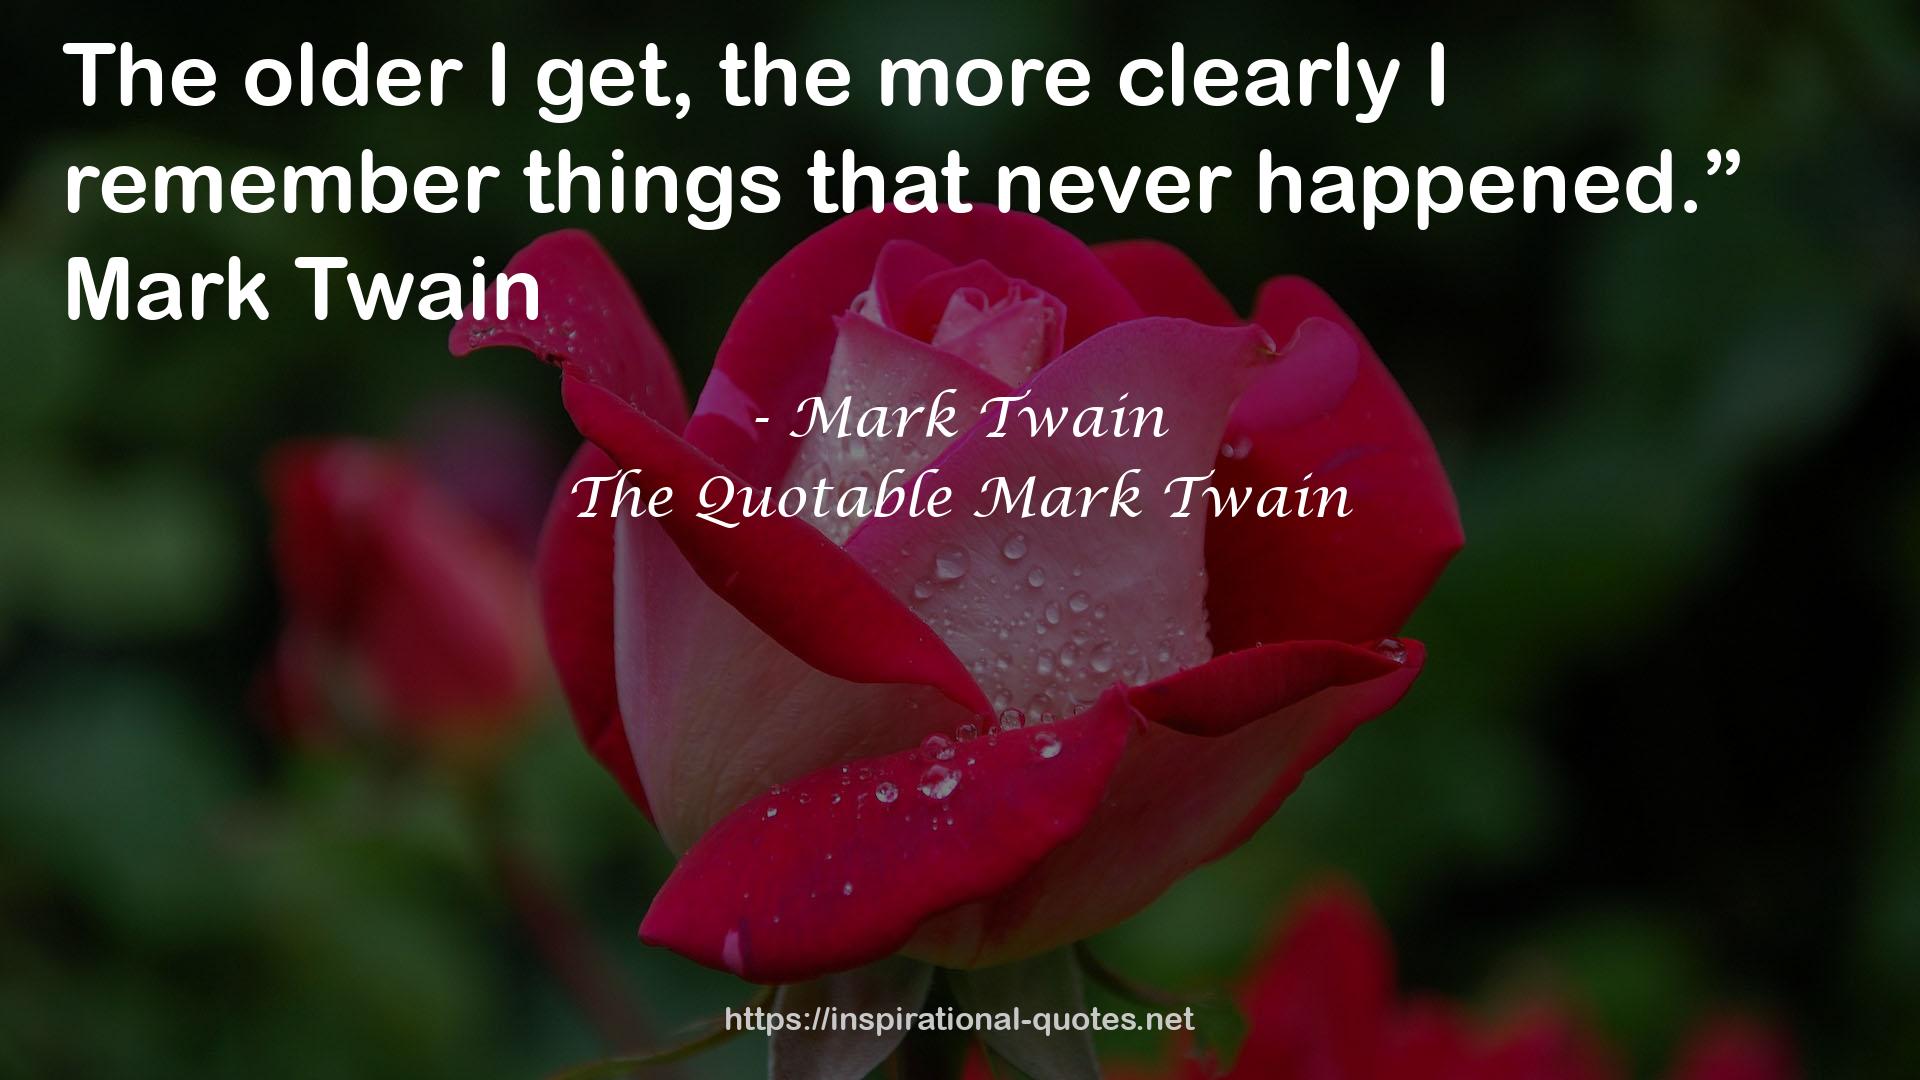 The Quotable Mark Twain QUOTES